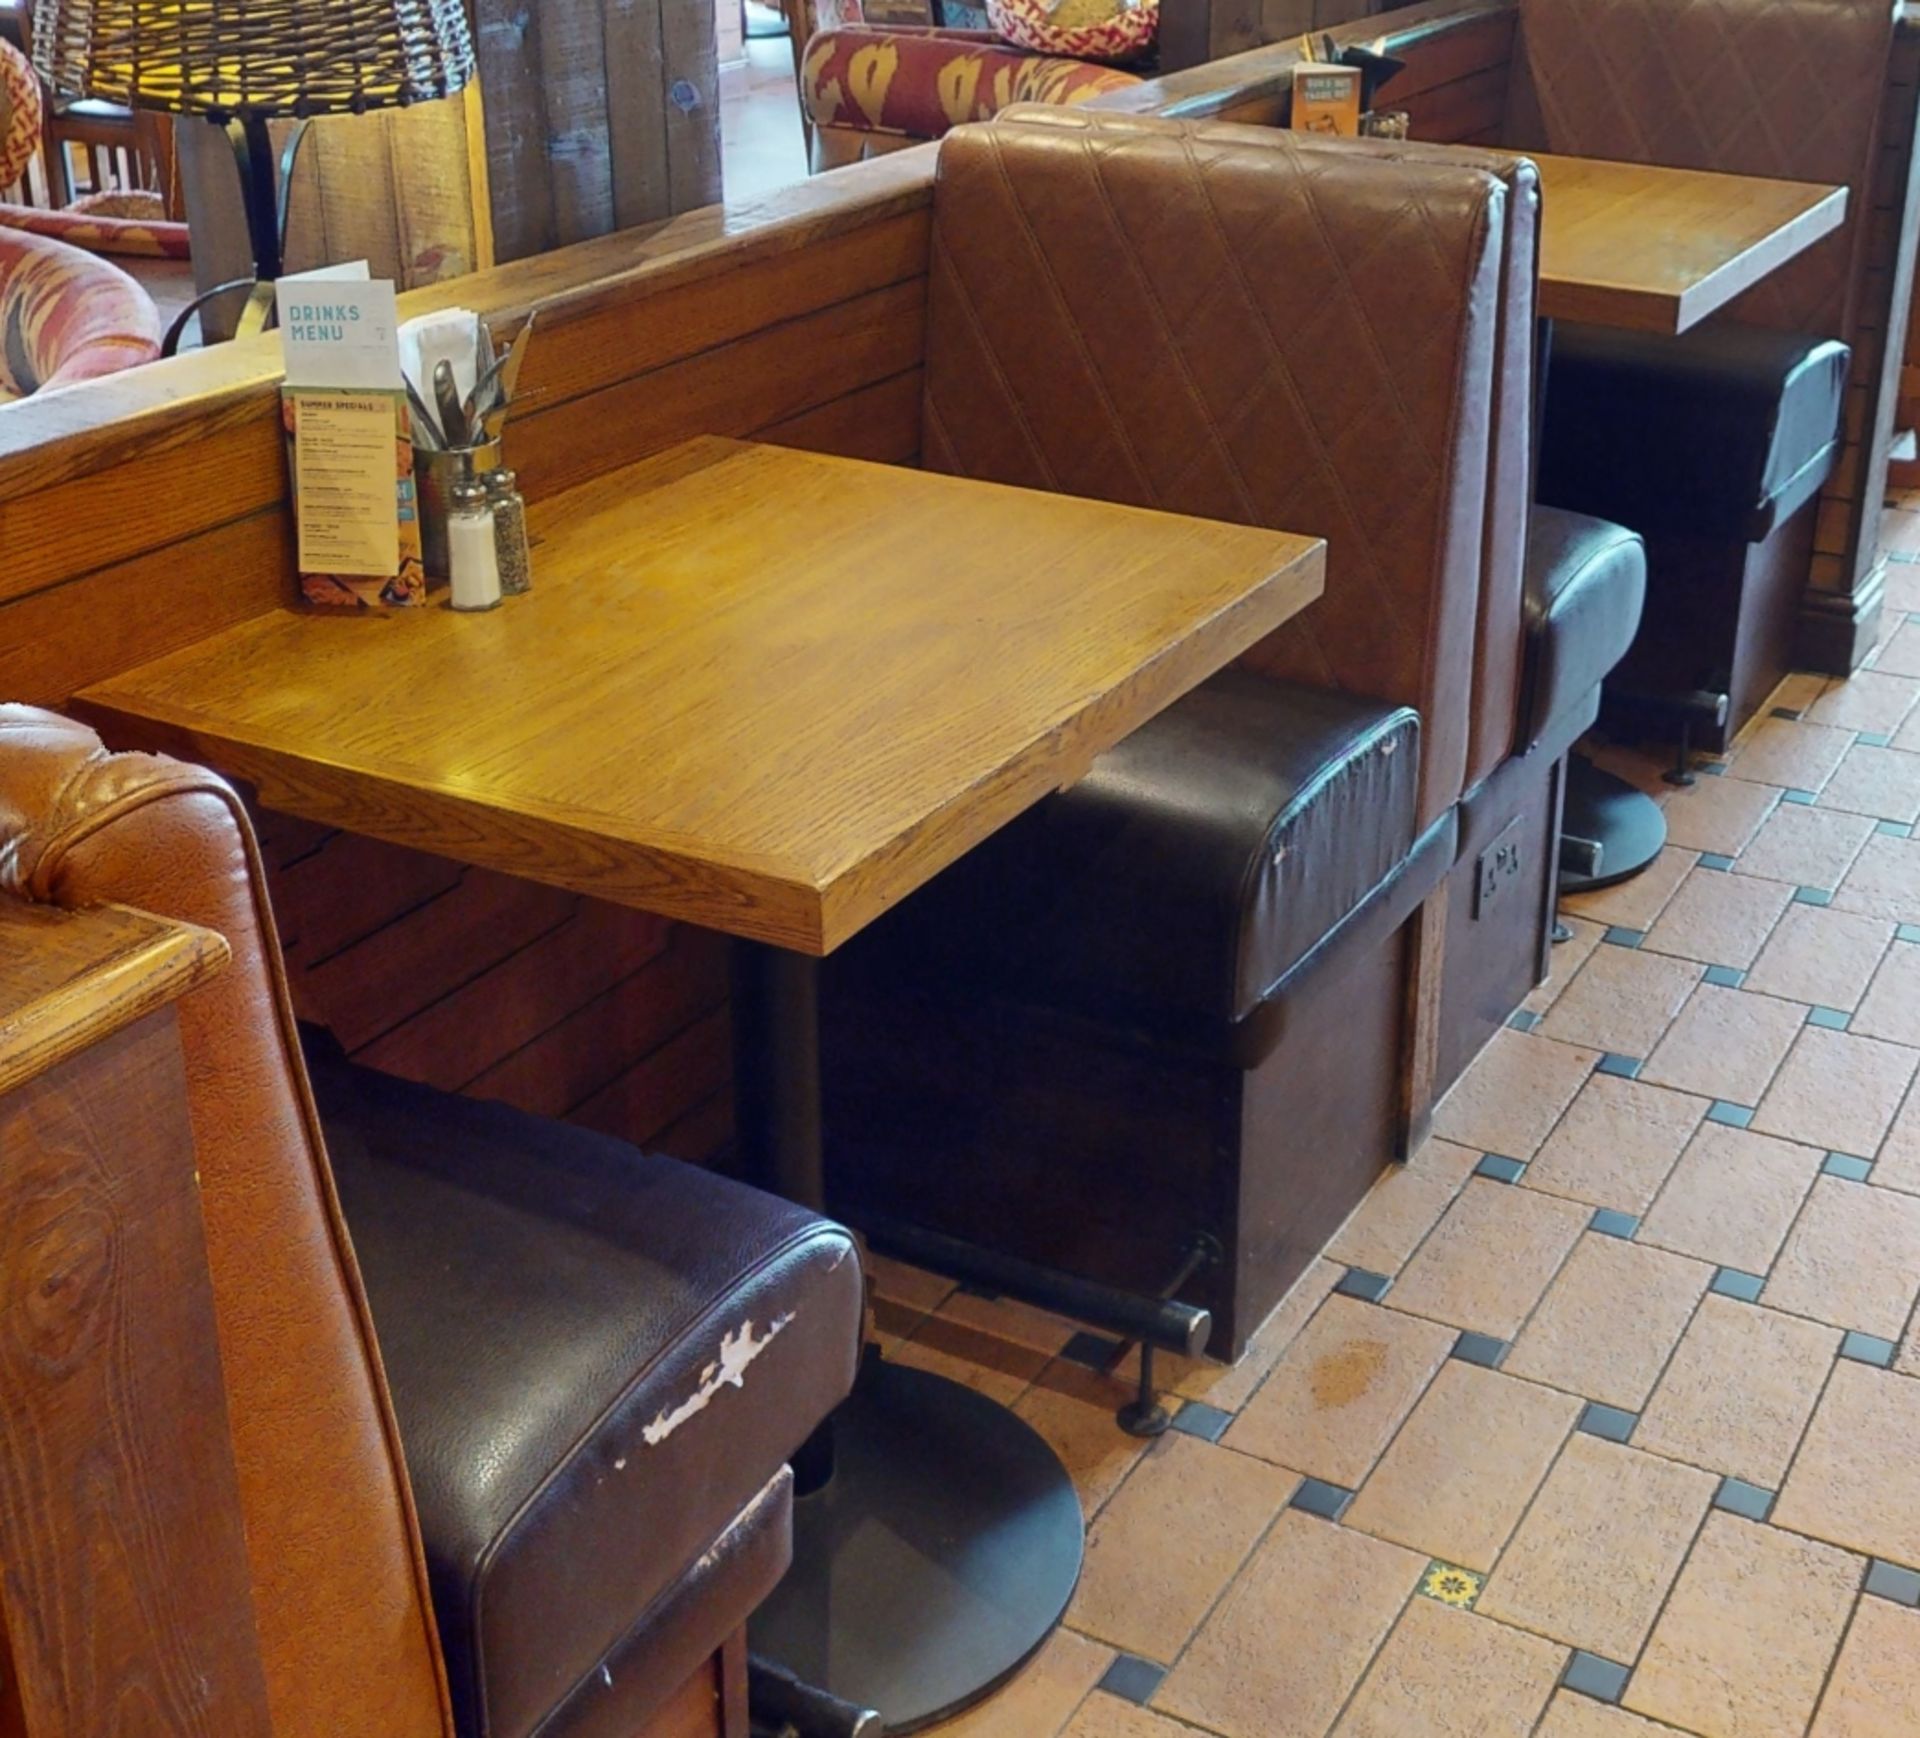 2 x Poser Restaurant Dining Tables With Tall Cast Iron Bases and Wood Panelled Tops With Wooden - Image 4 of 4